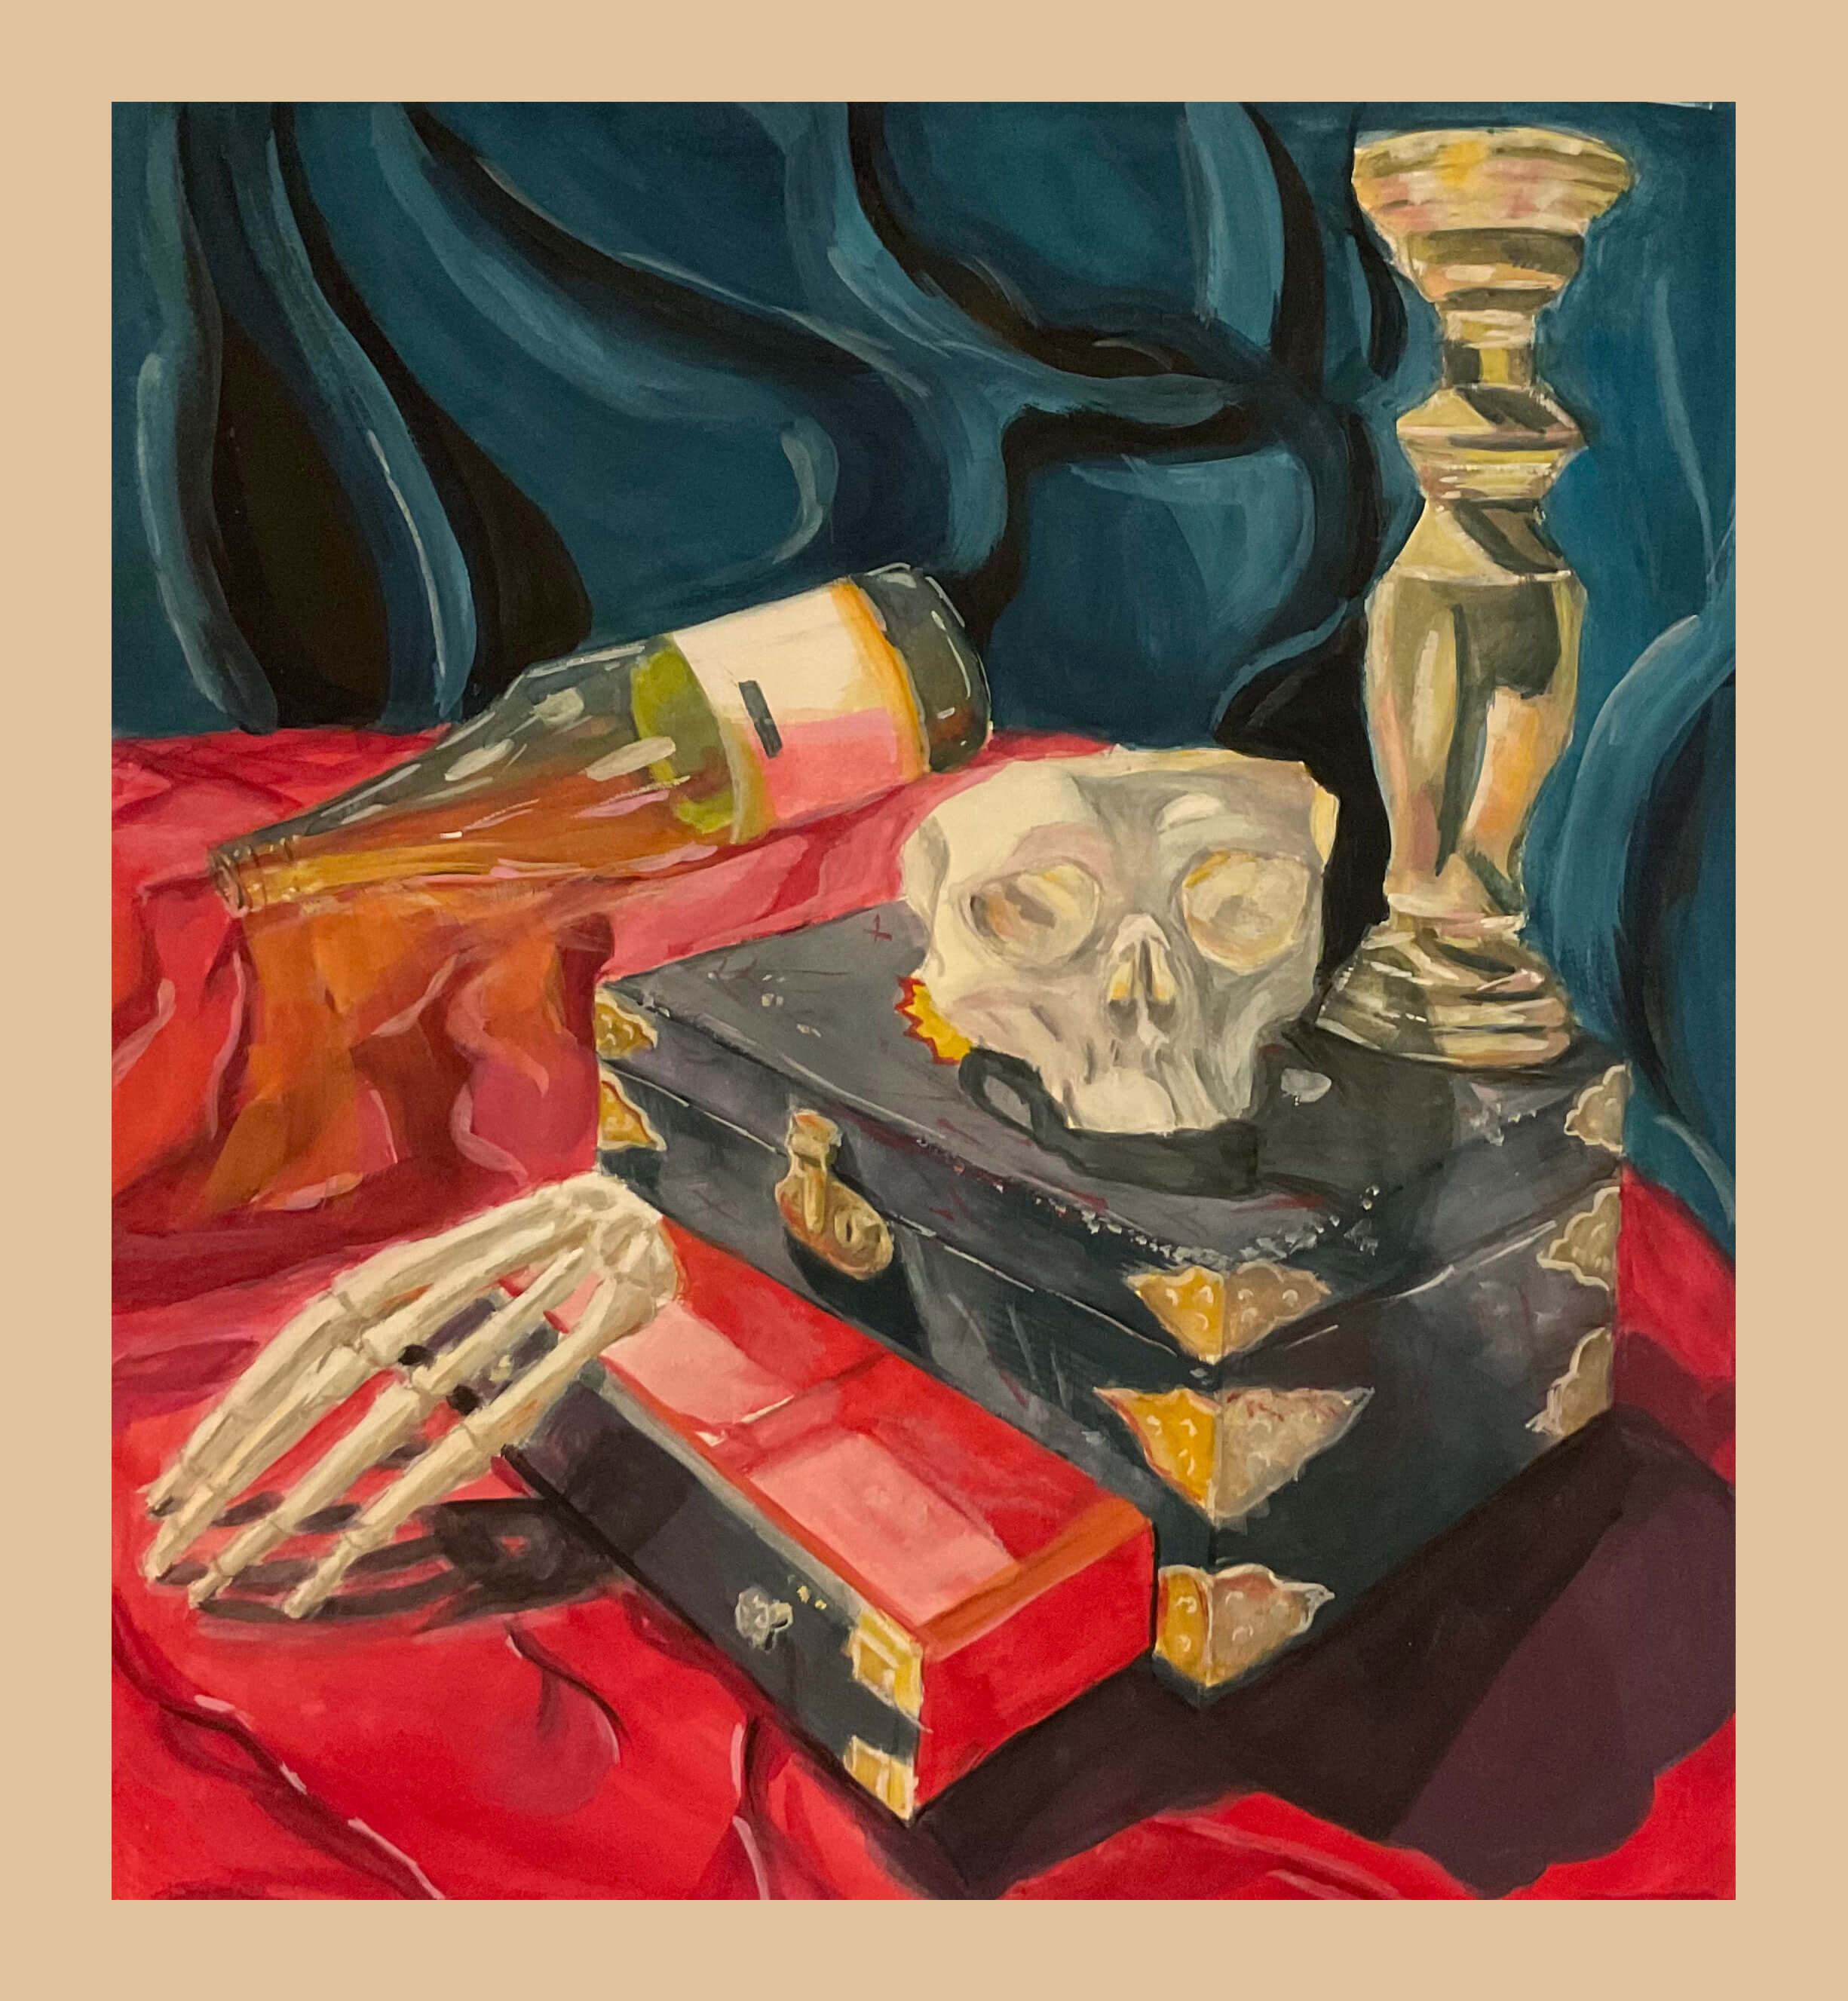 Painting of a skull, skeleton hand, a bottle, and boxes on a red tarp.